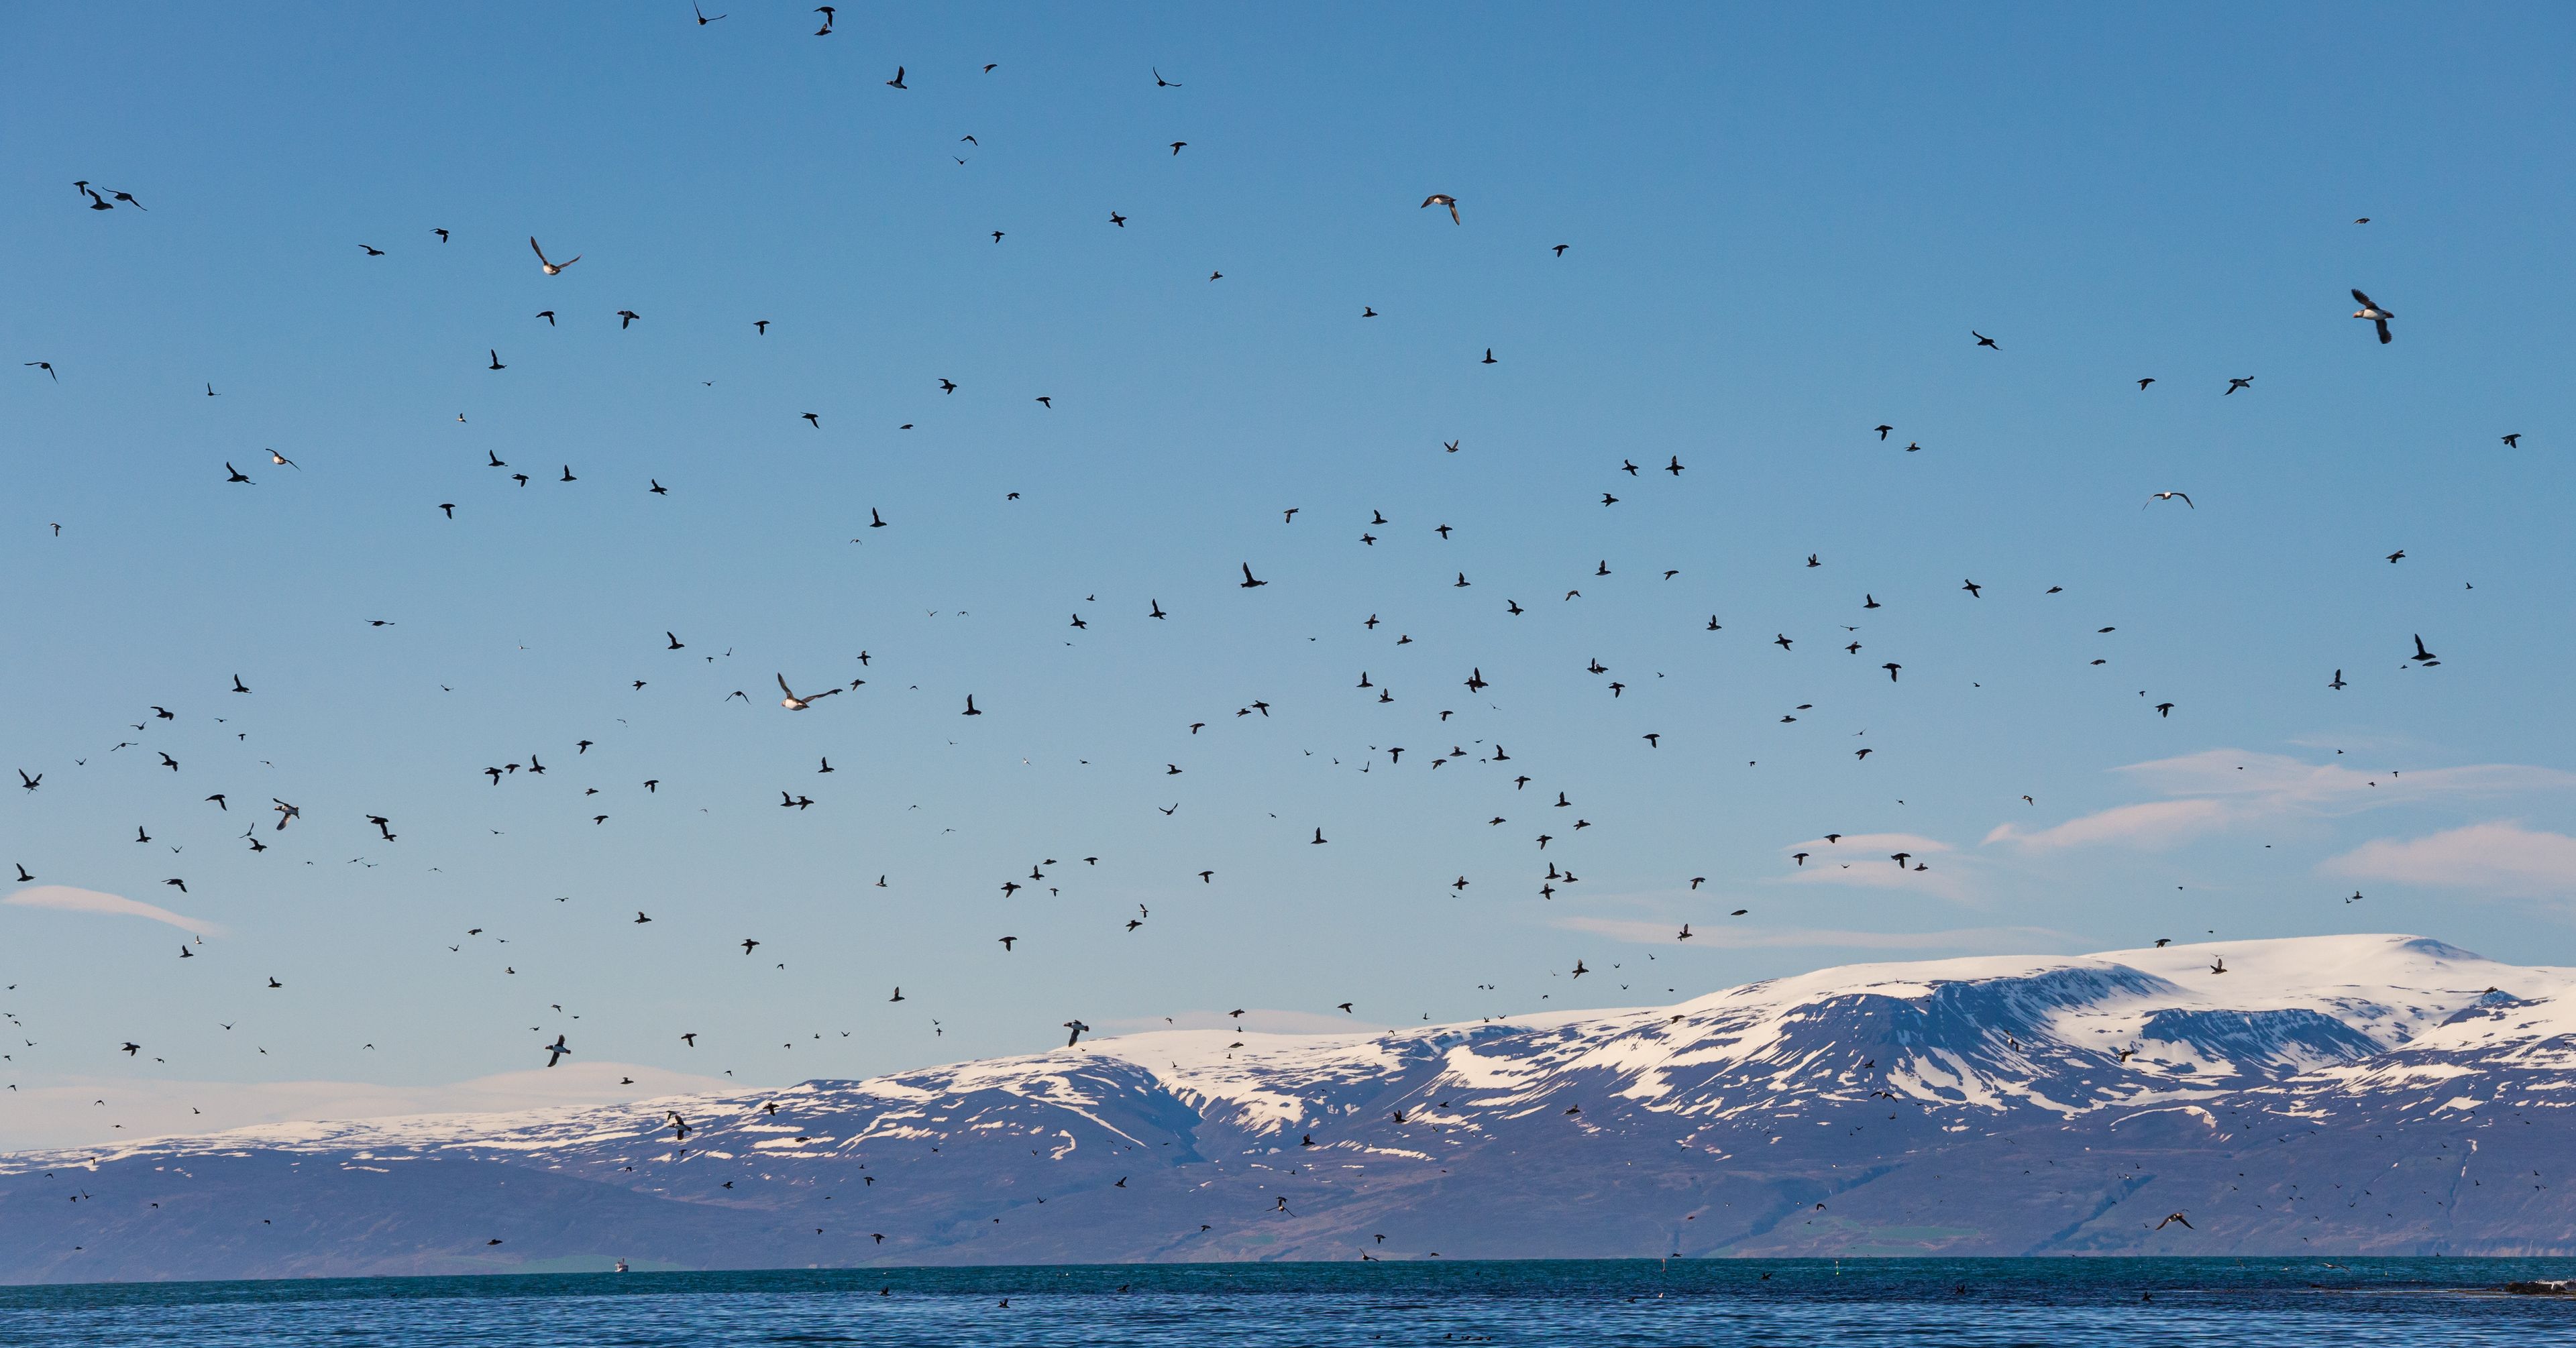 View on group of puffins flying around Lundey. You can see the ocean and the snow-capped mountains in the background.